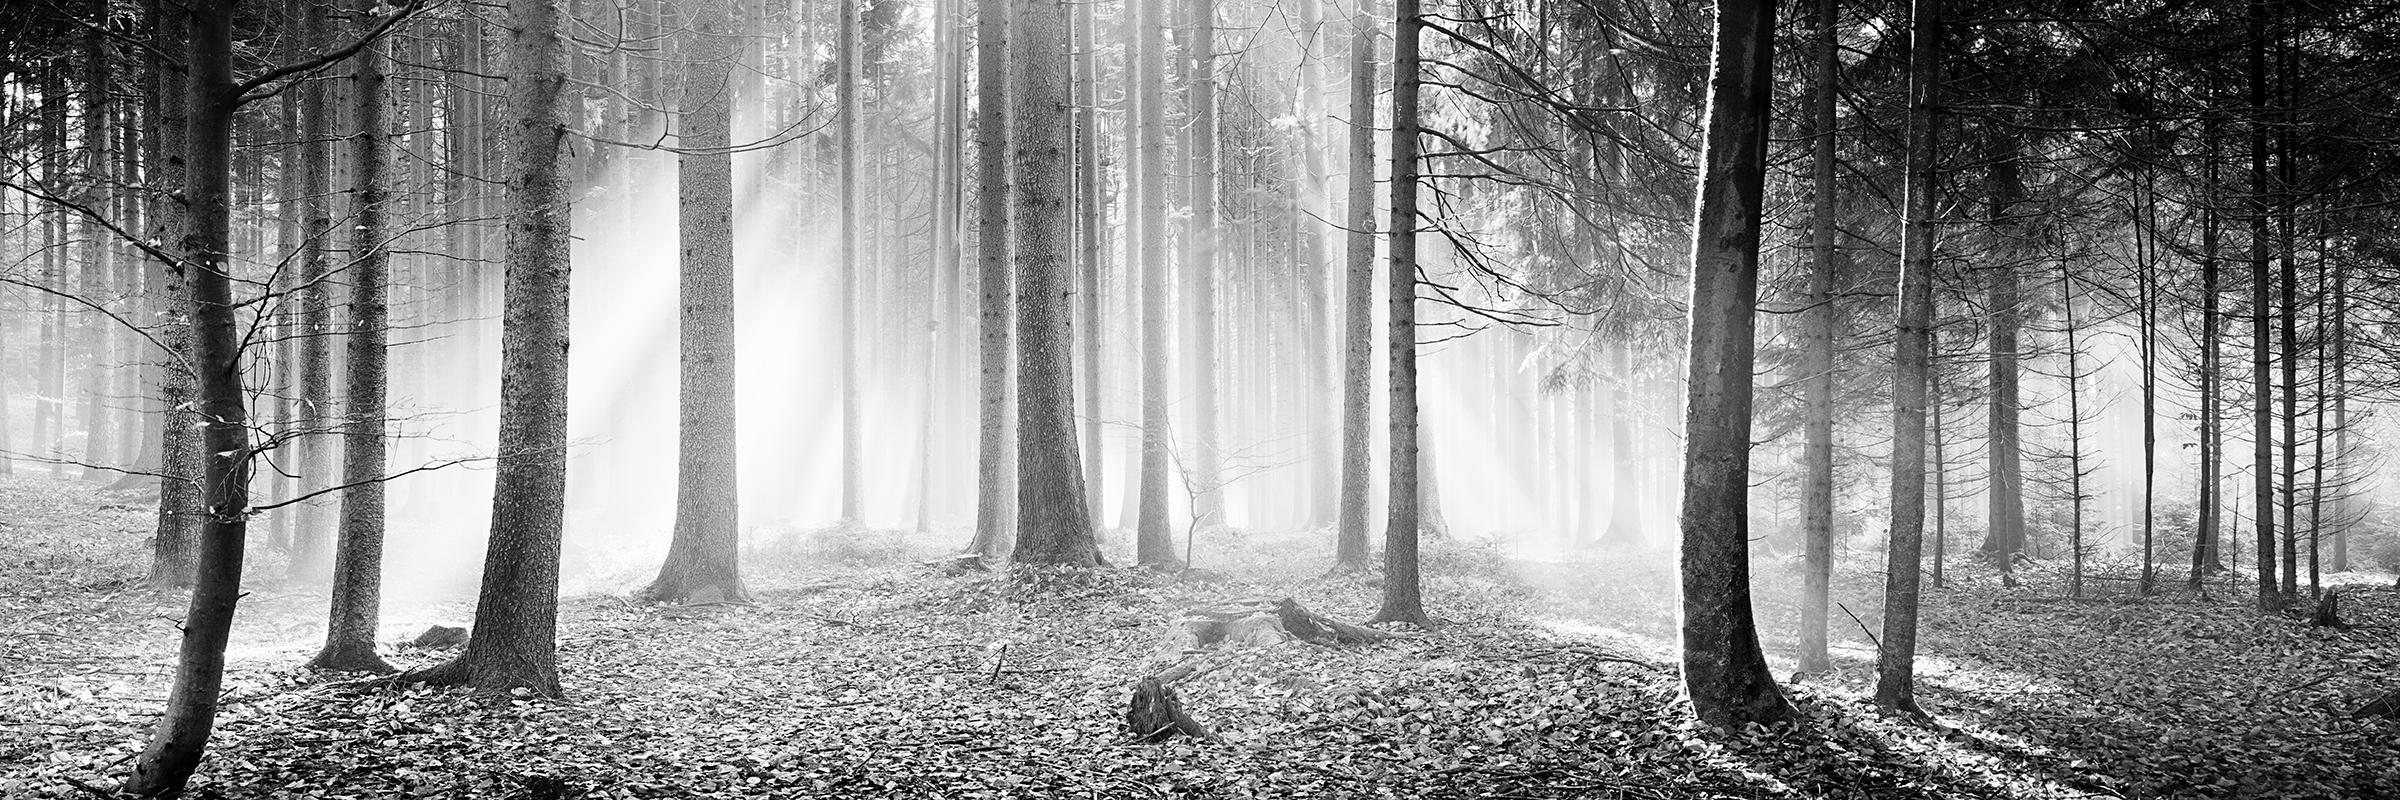 Gerald Berghammer, Ina Forstinger Black and White Photograph - Enchanted Forest foggy sunny morning Austria black white landscape photography